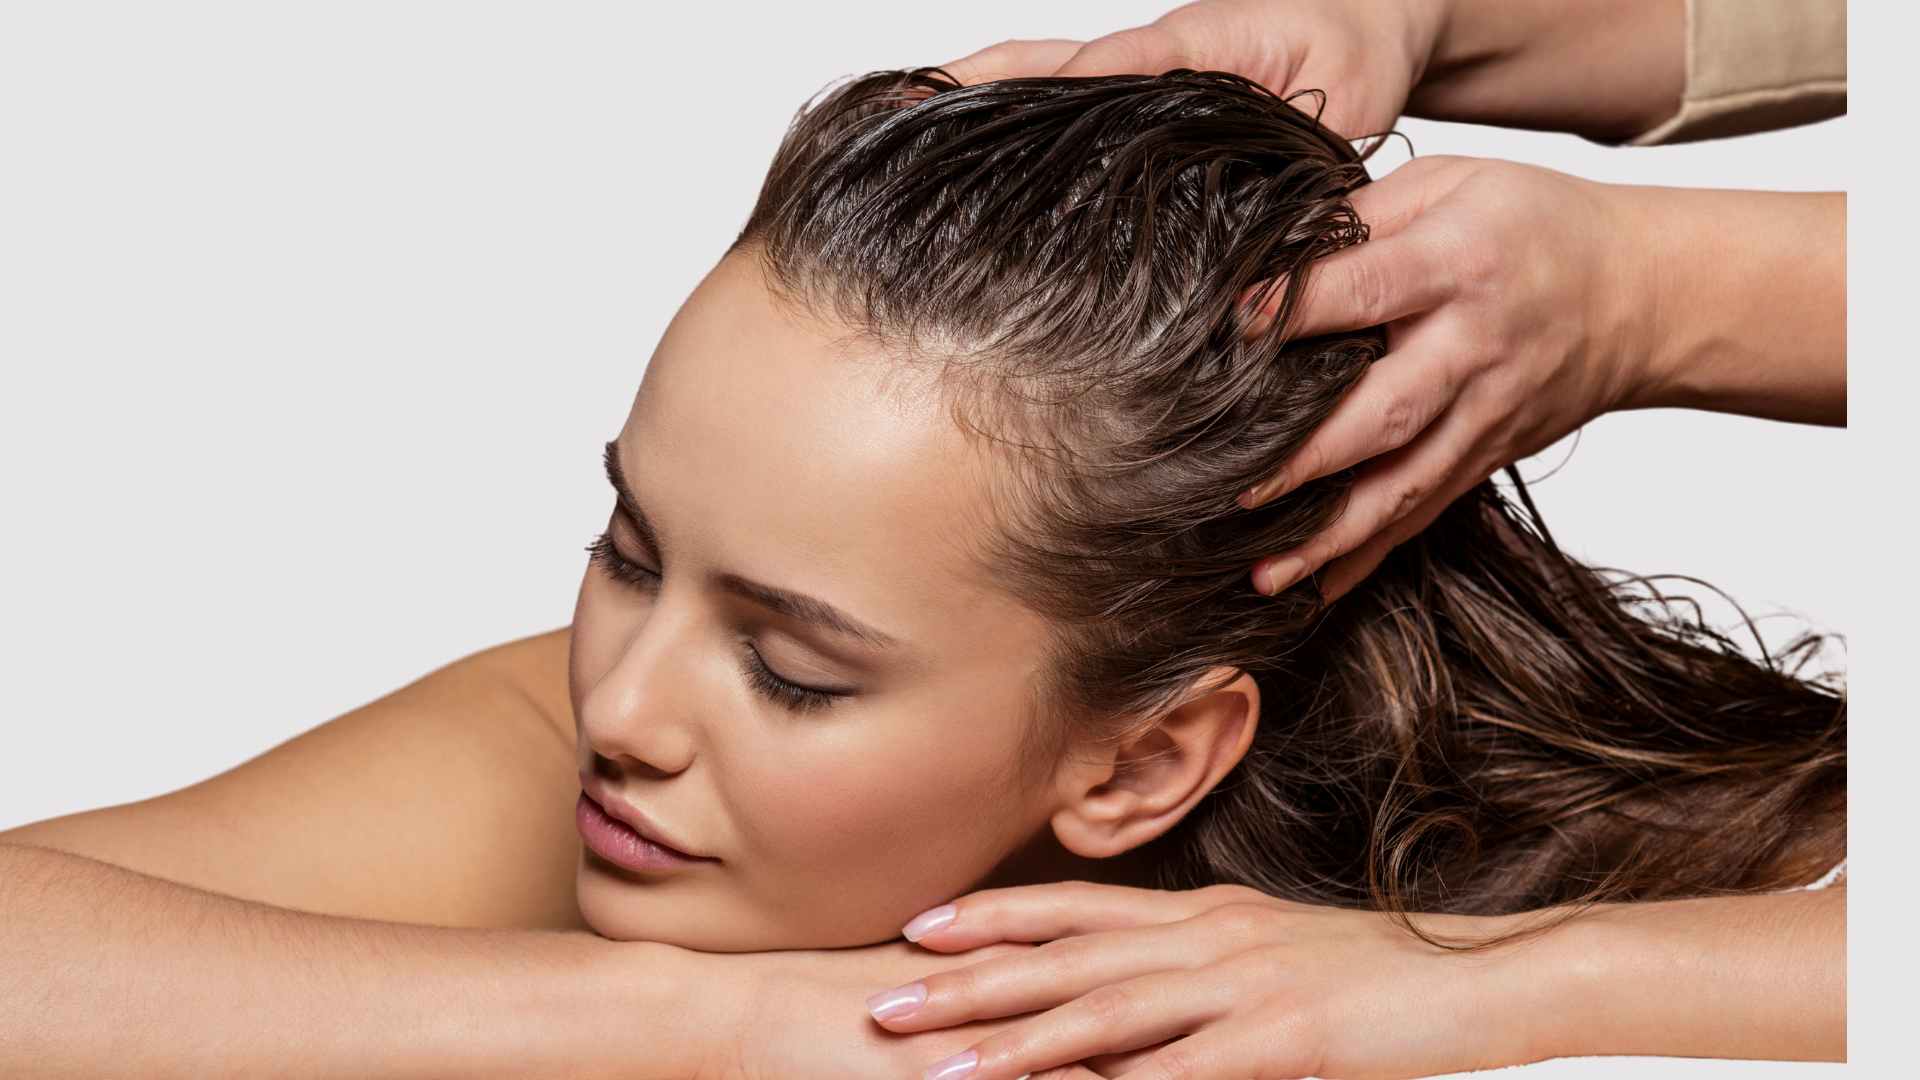 Female getting a scalp massage for scalp health to promote shiny hair